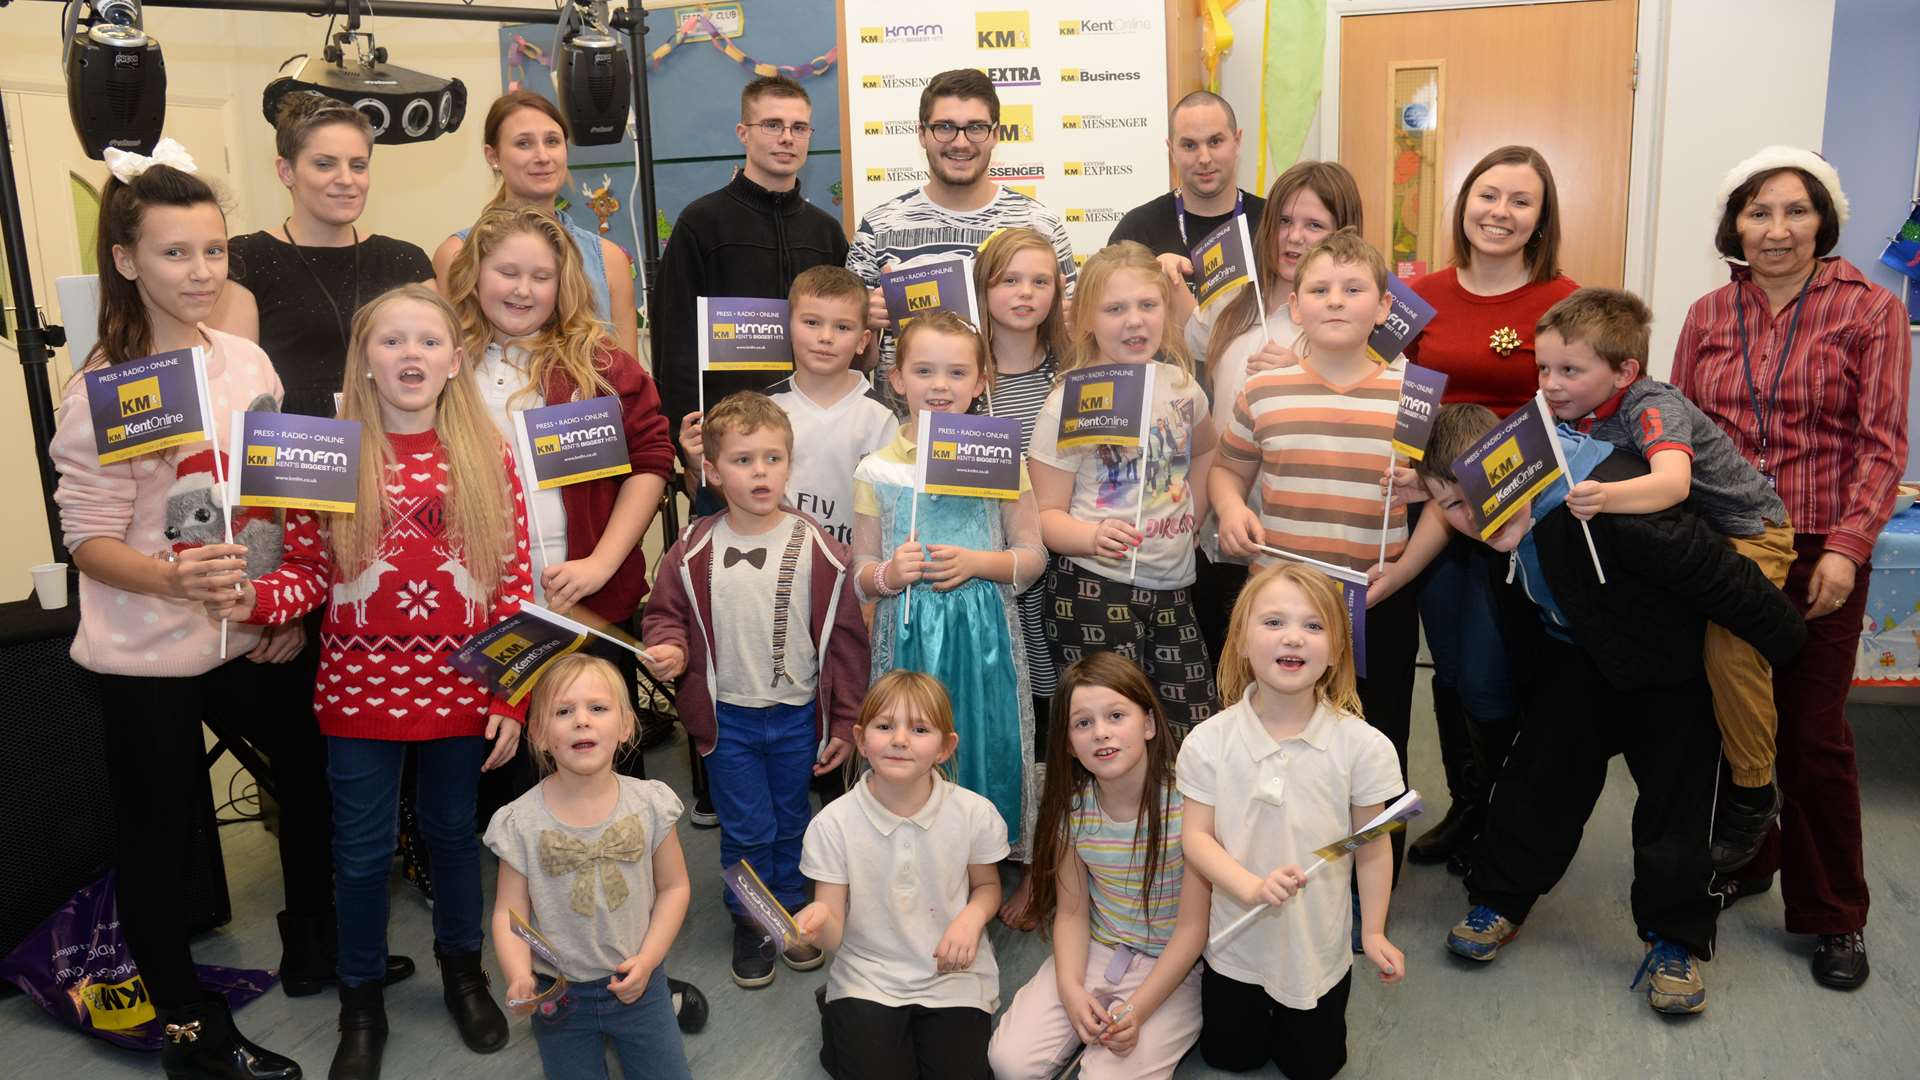 KMFM DJ Ben Pearce with children and staff at the Spring Lane Neighbourhood Centre Christmas party on Friday. Picture: Chris Davey FM3573258